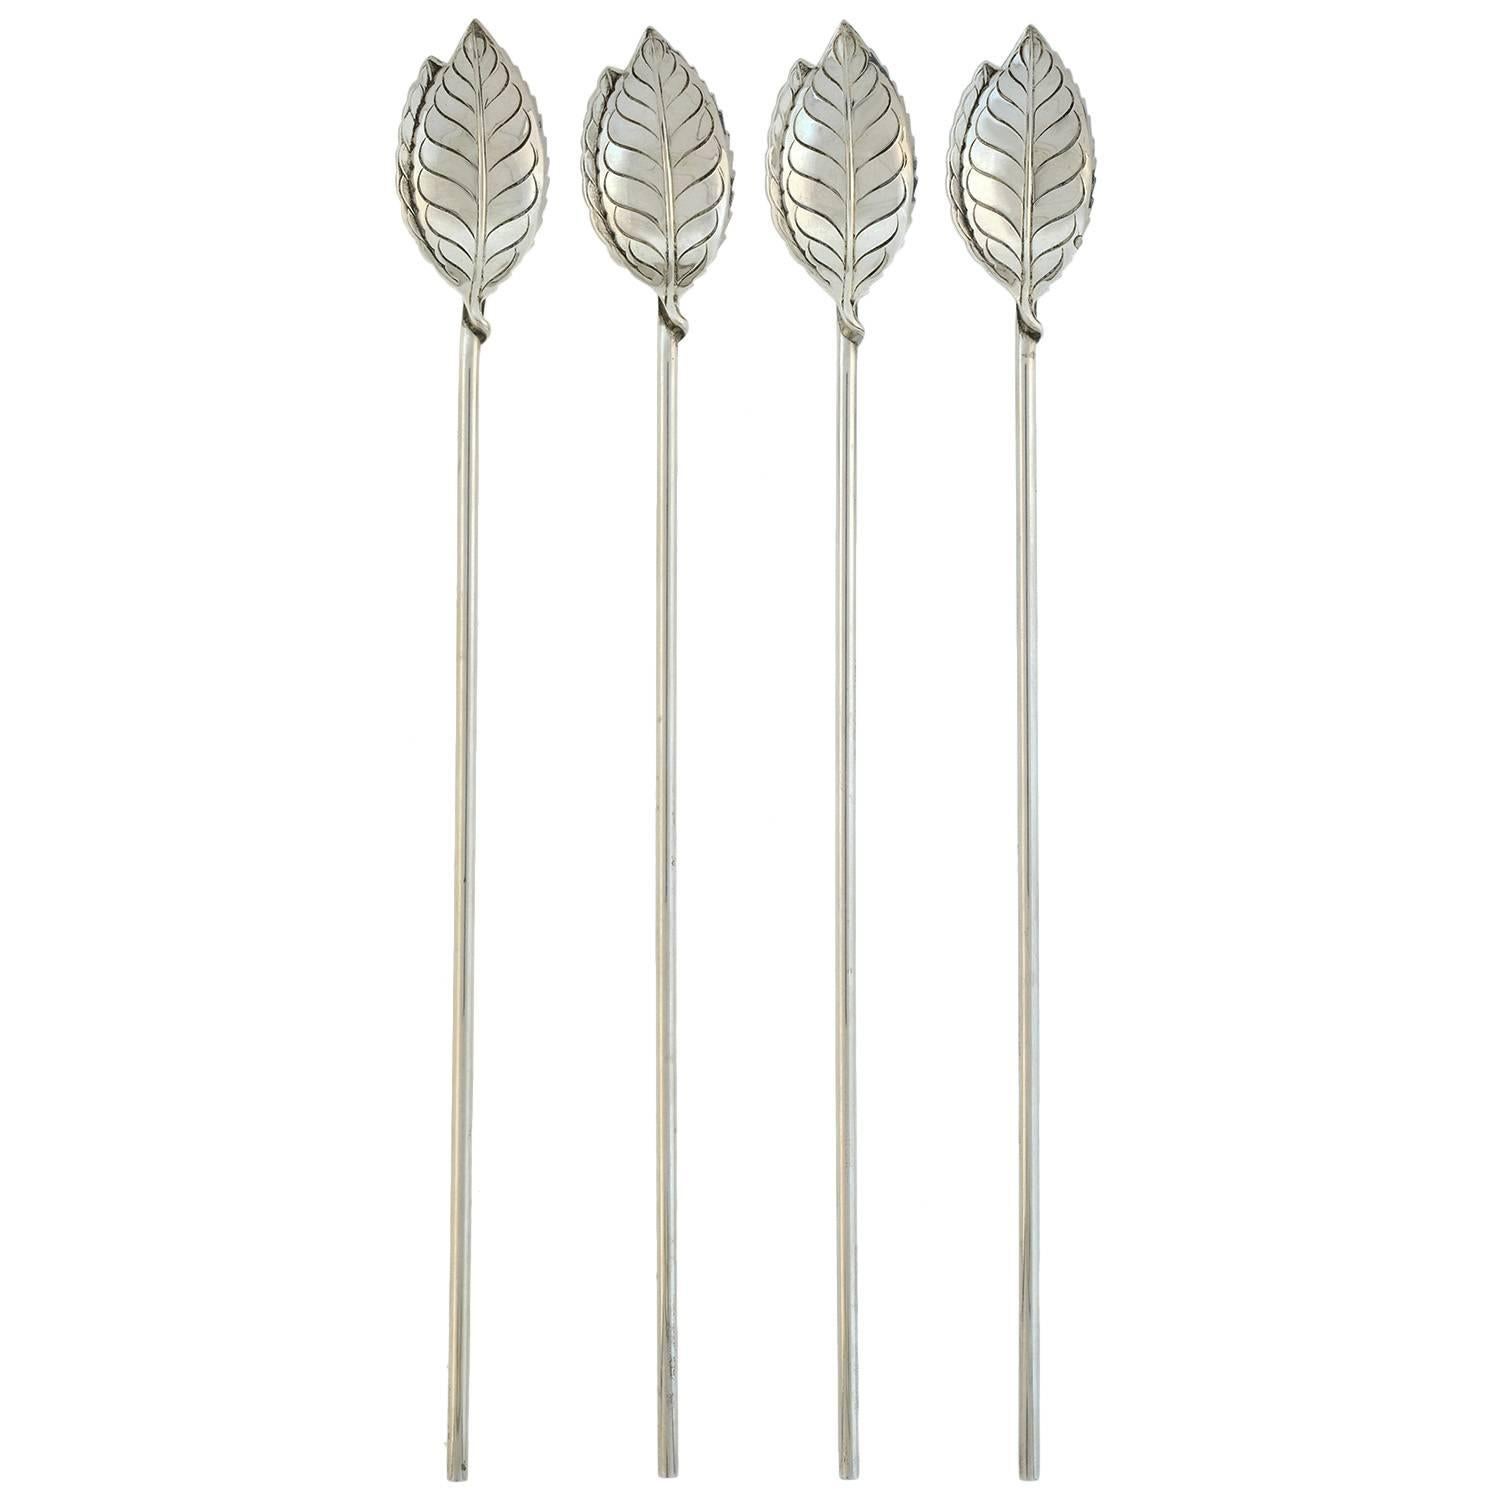 A stunning Vintage spoon set from the 1950s! Made by legendary maker Tiffany & Company, this fabulous set consists of 4 iced tea sipping spoons which have a leaf design and sterling bodies. The spoons are very long in length and the handle of each